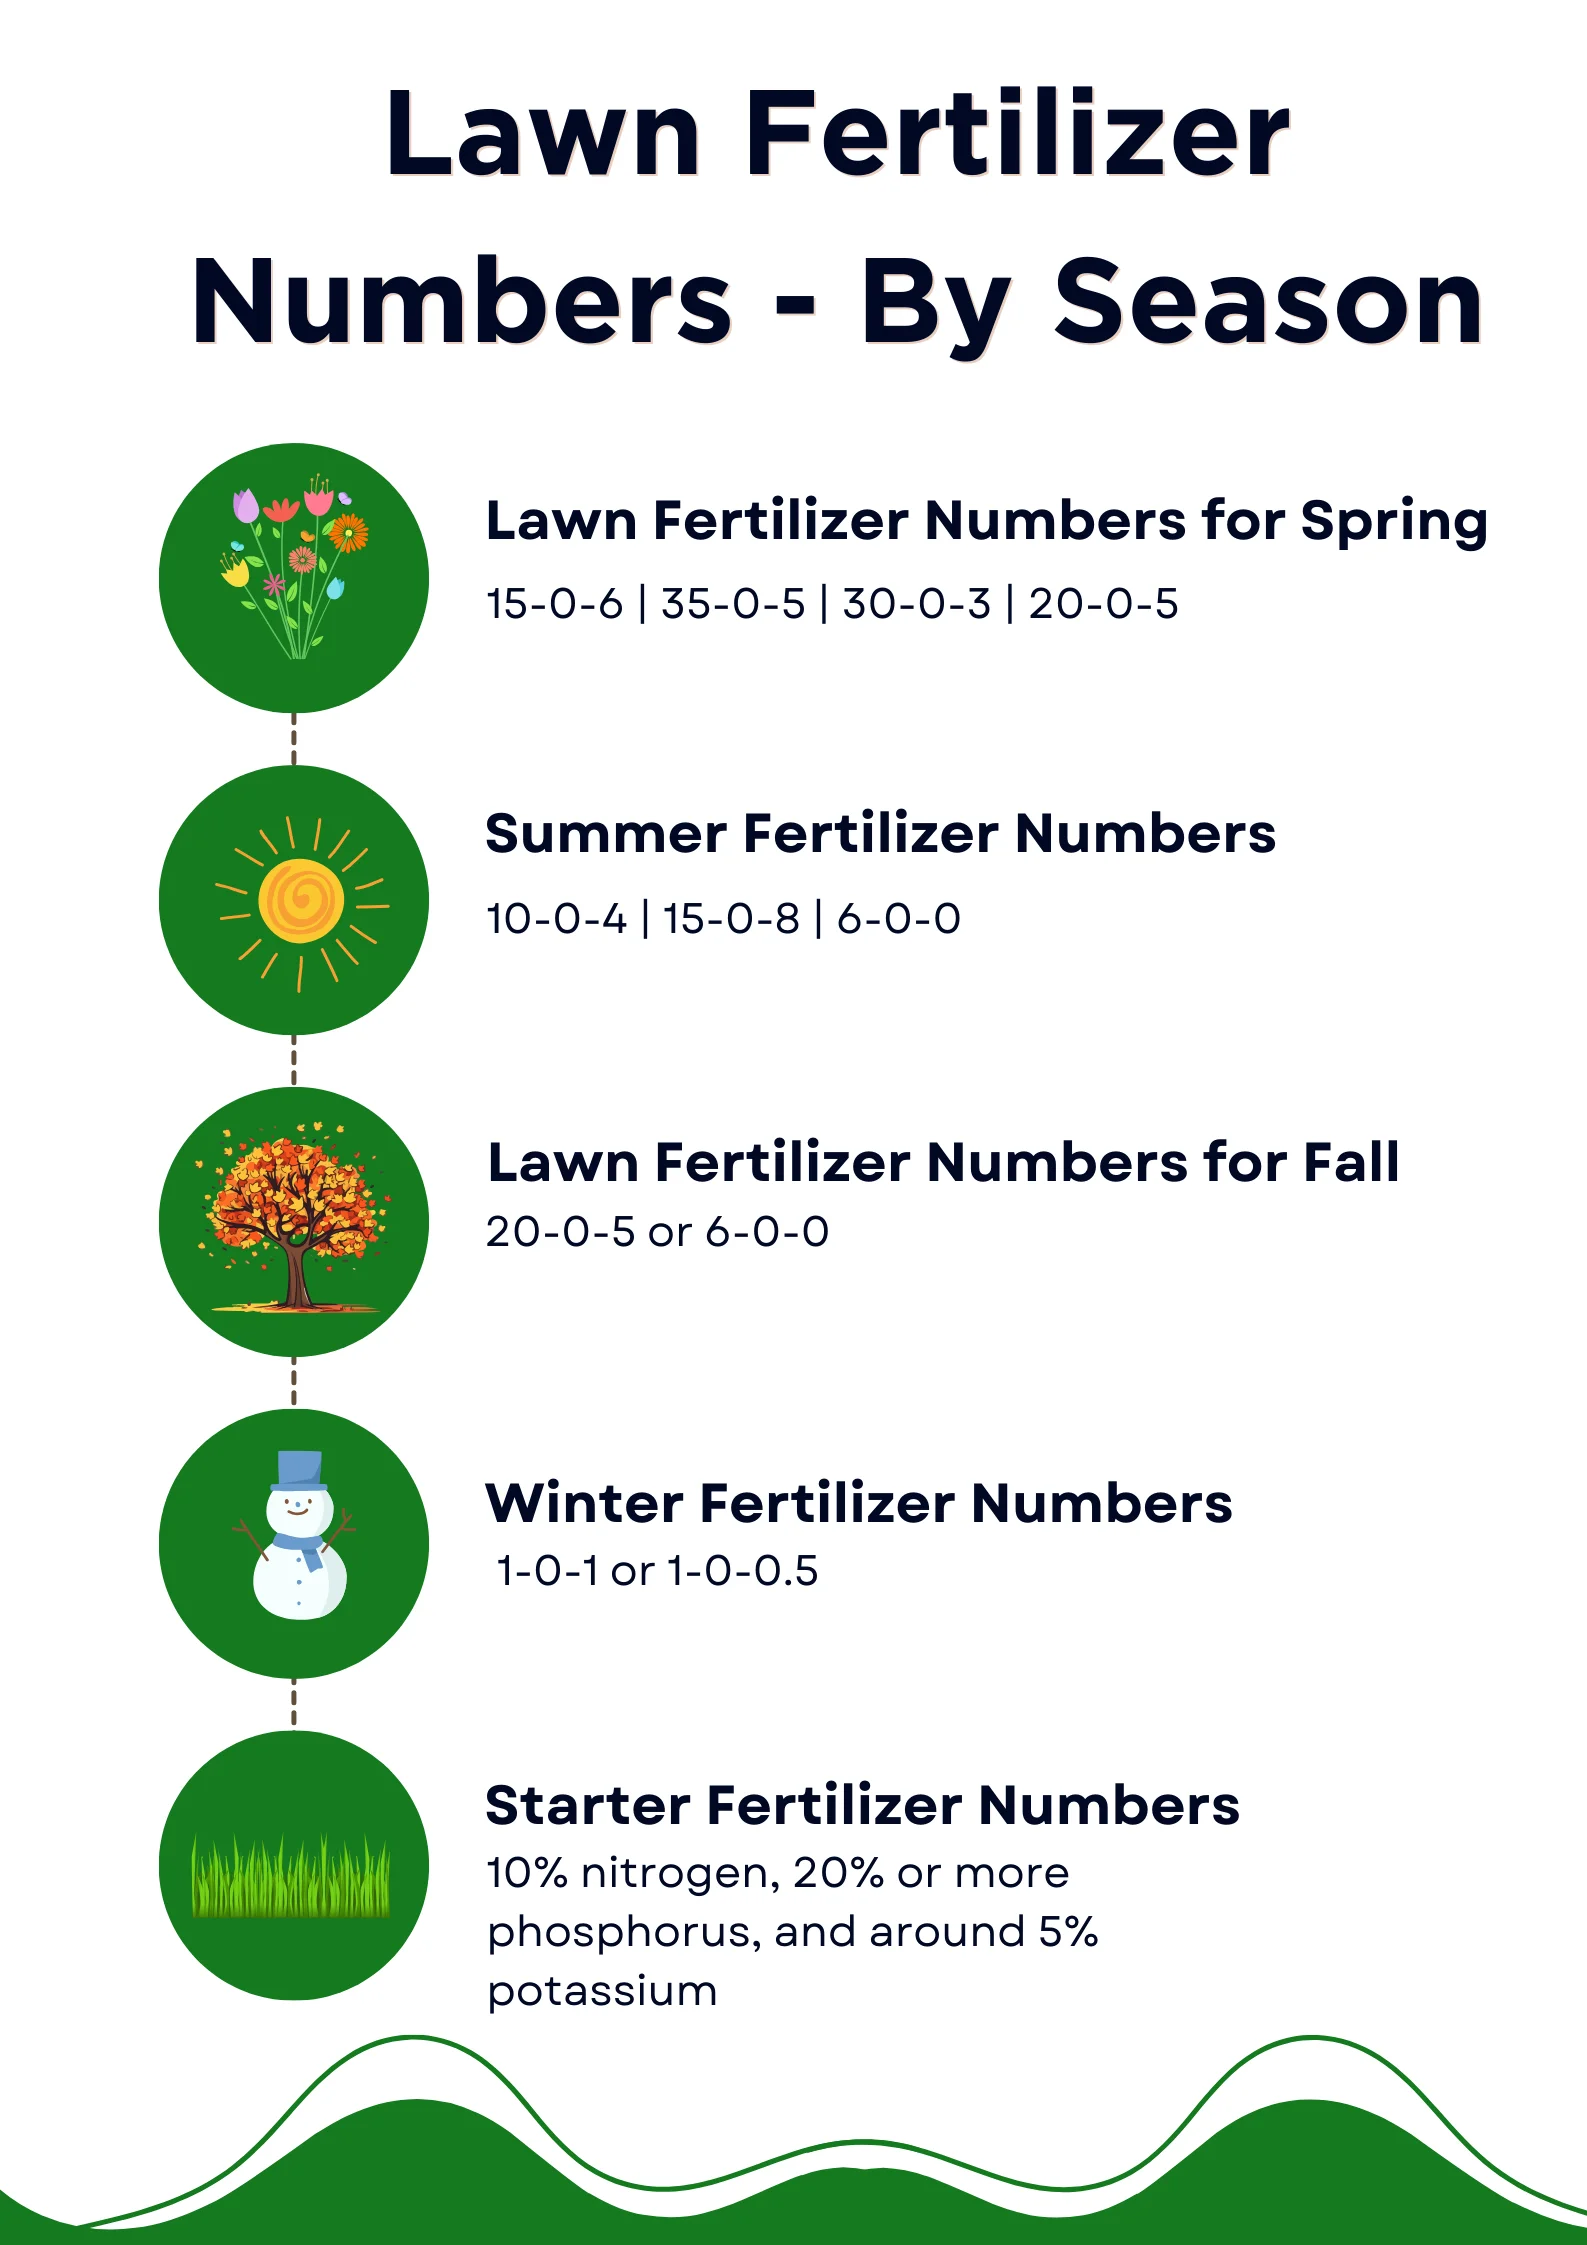 An infographic of the lawn fertilizer numbers for each season